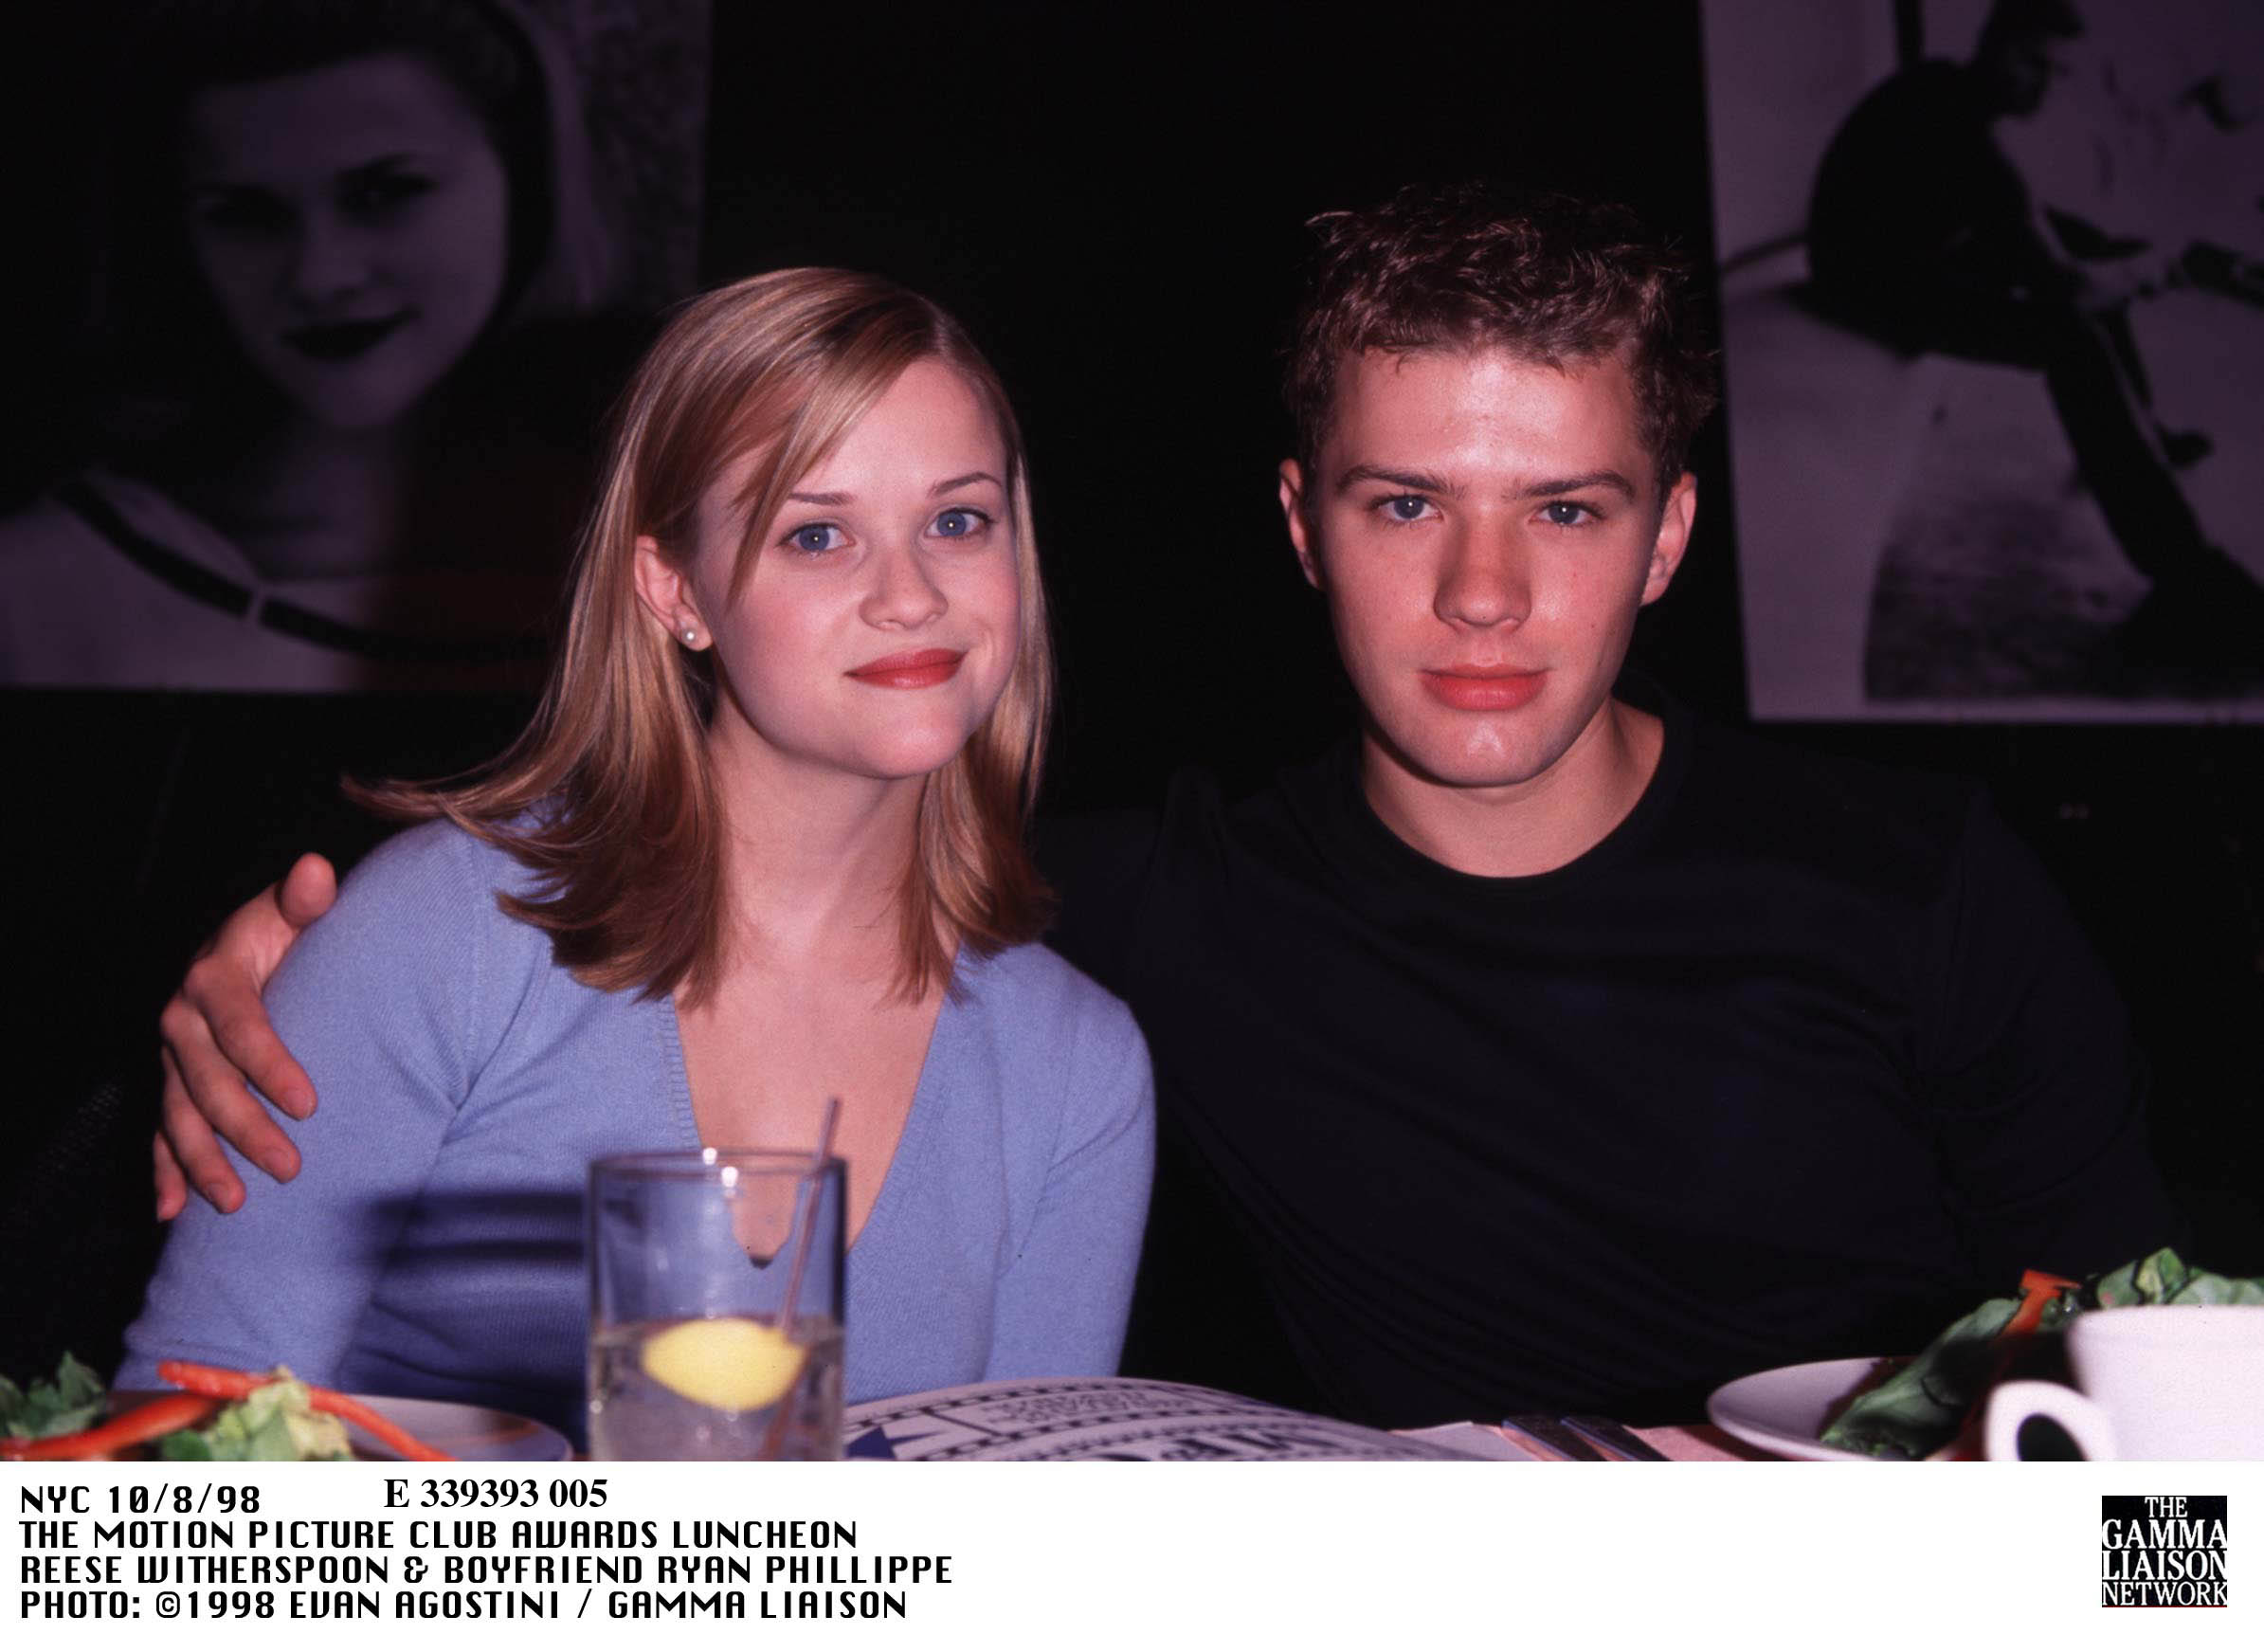 Nyc 10/8/98 E 339393 005 The Motion Picture Club Awards Luncheon Reese Witherspoon & Boyfriend Ryan Phillippe | Source: Getty Images